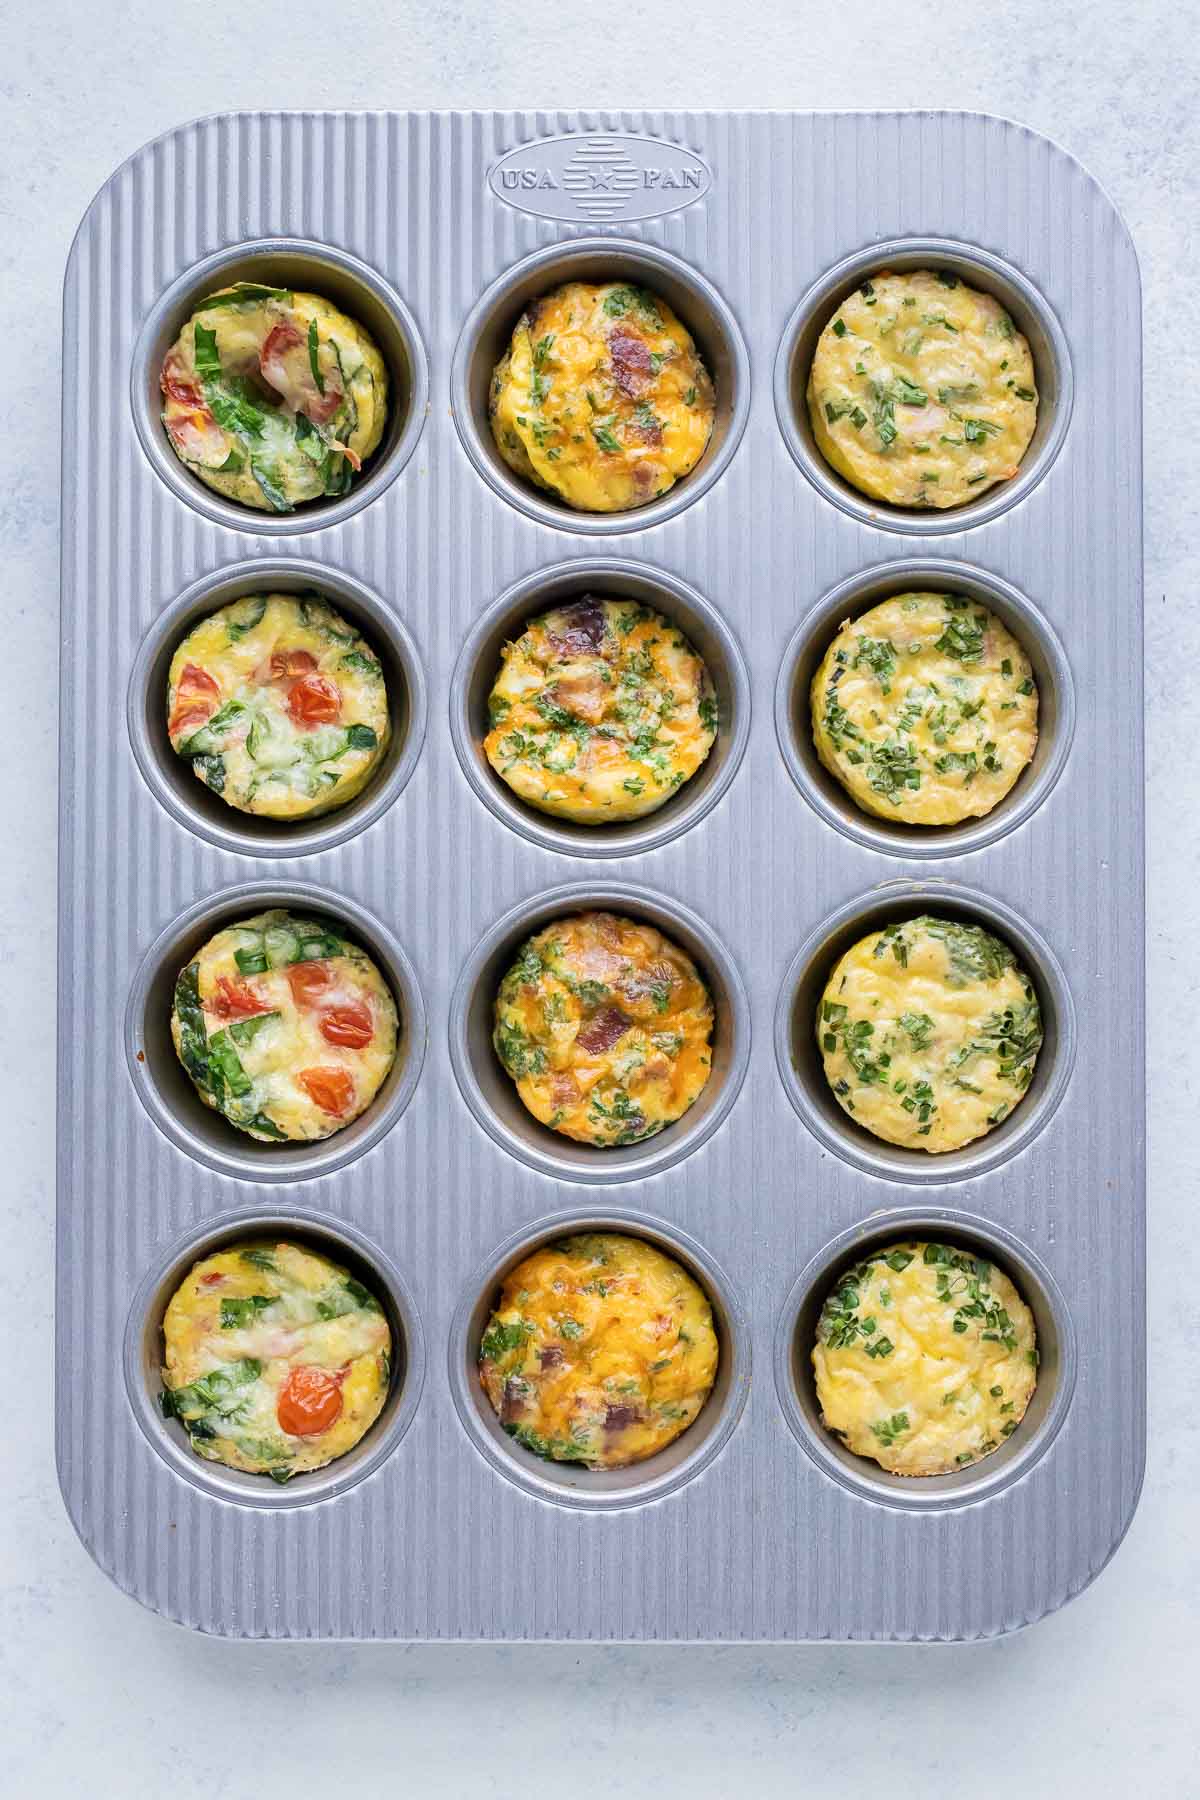 Egg muffins are cooked with different add-ins in a muffin pan in the oven.